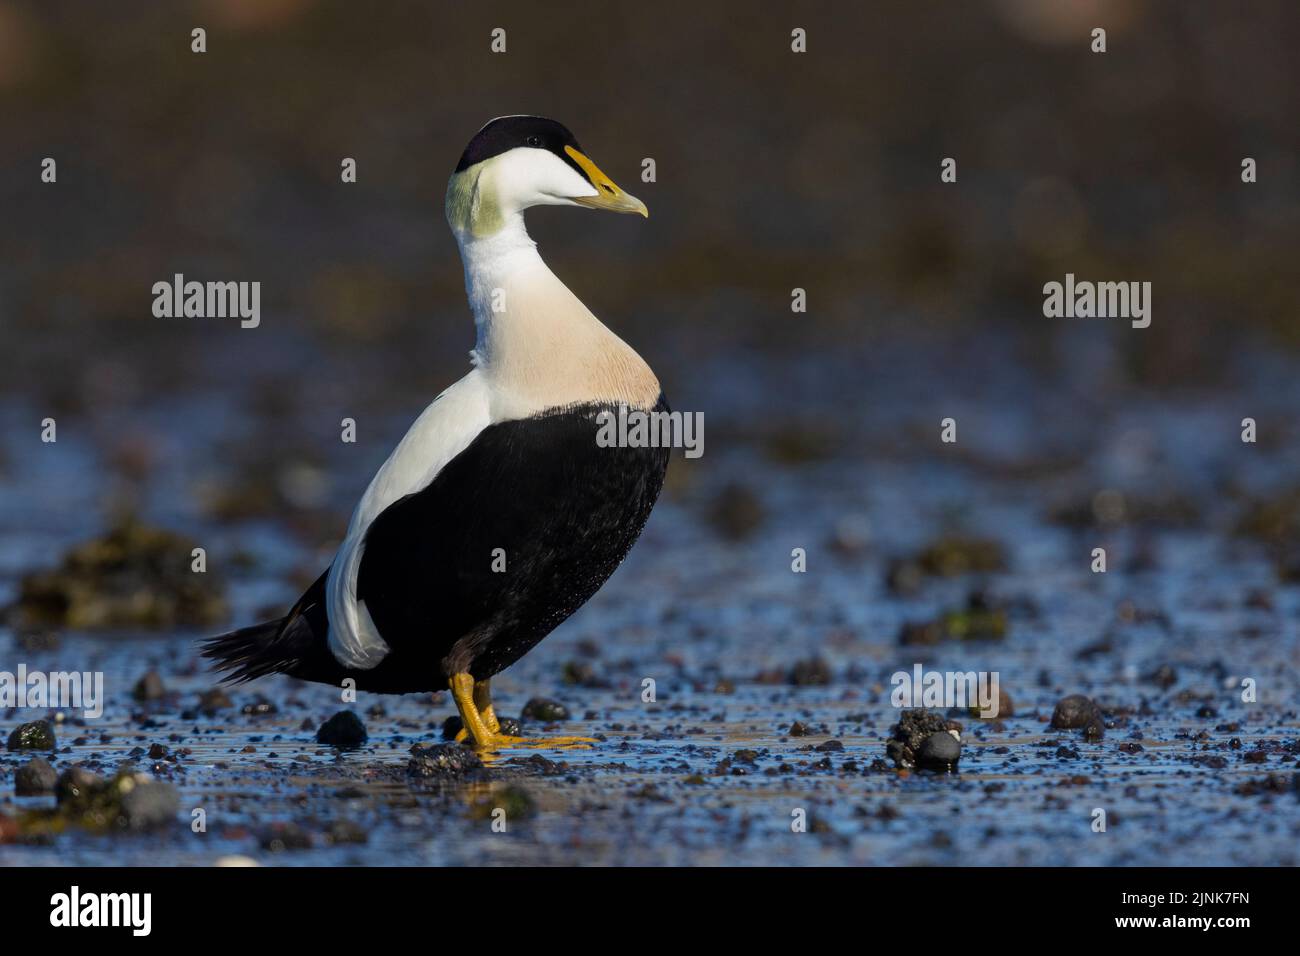 Common Eider (Somateria mollissima borealis), side view of an adult male standing on the ground, Southern Region, Iceland Stock Photo